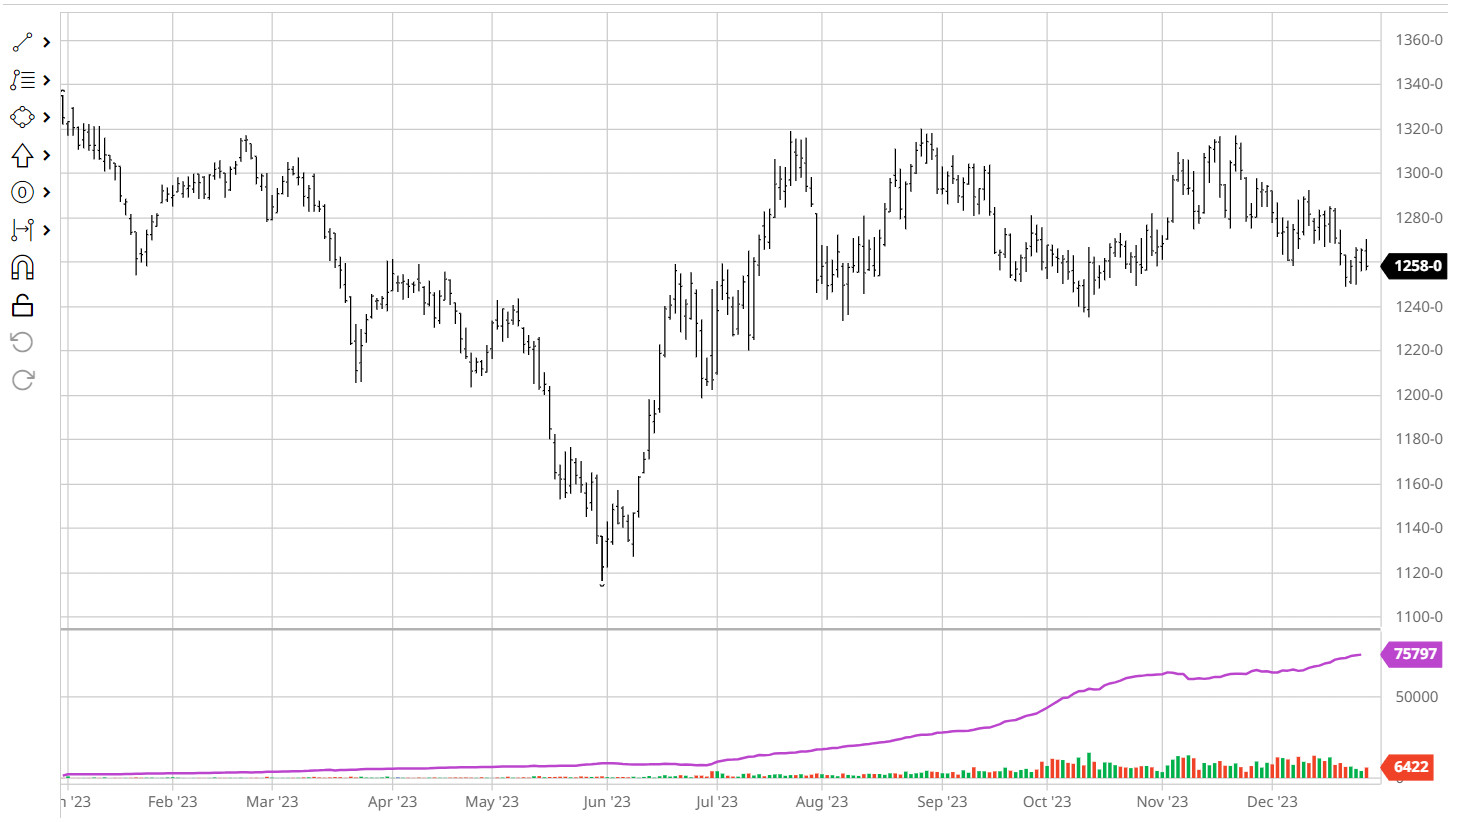 Soybean harvest futures chart